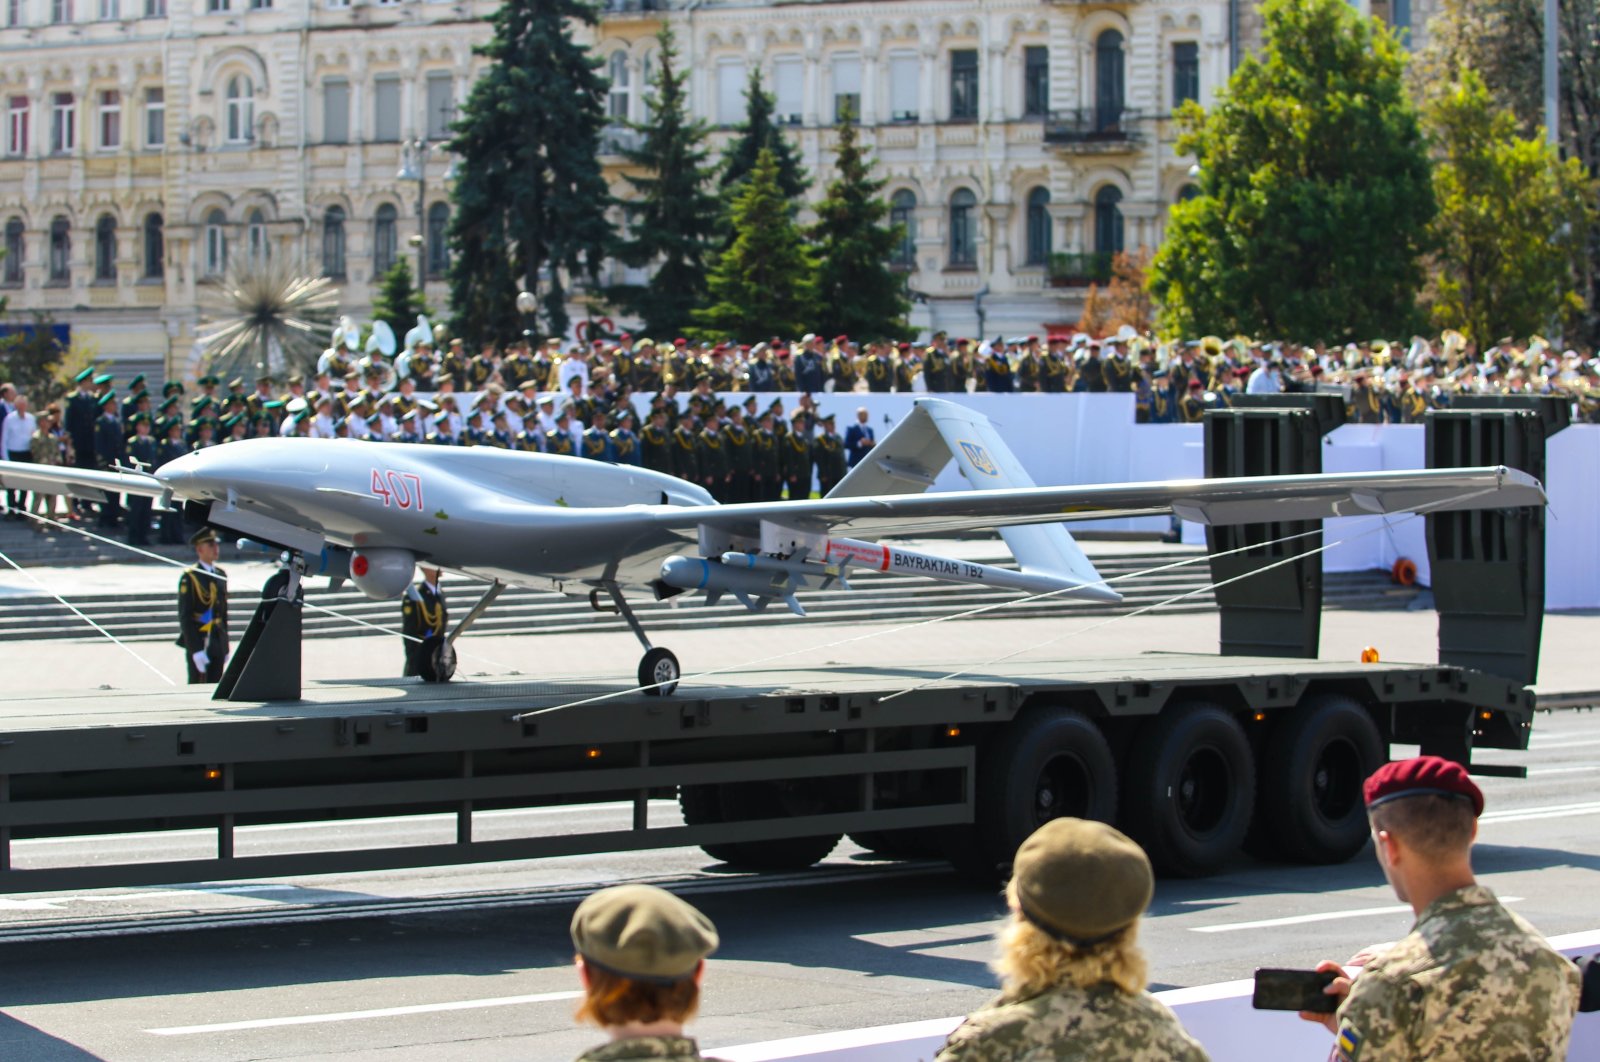 Ukrainian Army-owned Bayraktar TB2 UCAV on display during the military parade on the occasion of the 30th anniversary of Ukraine's Independence, Kyiv, Ukraine, Aug. 24, 2021. (Shutterstock Photo)